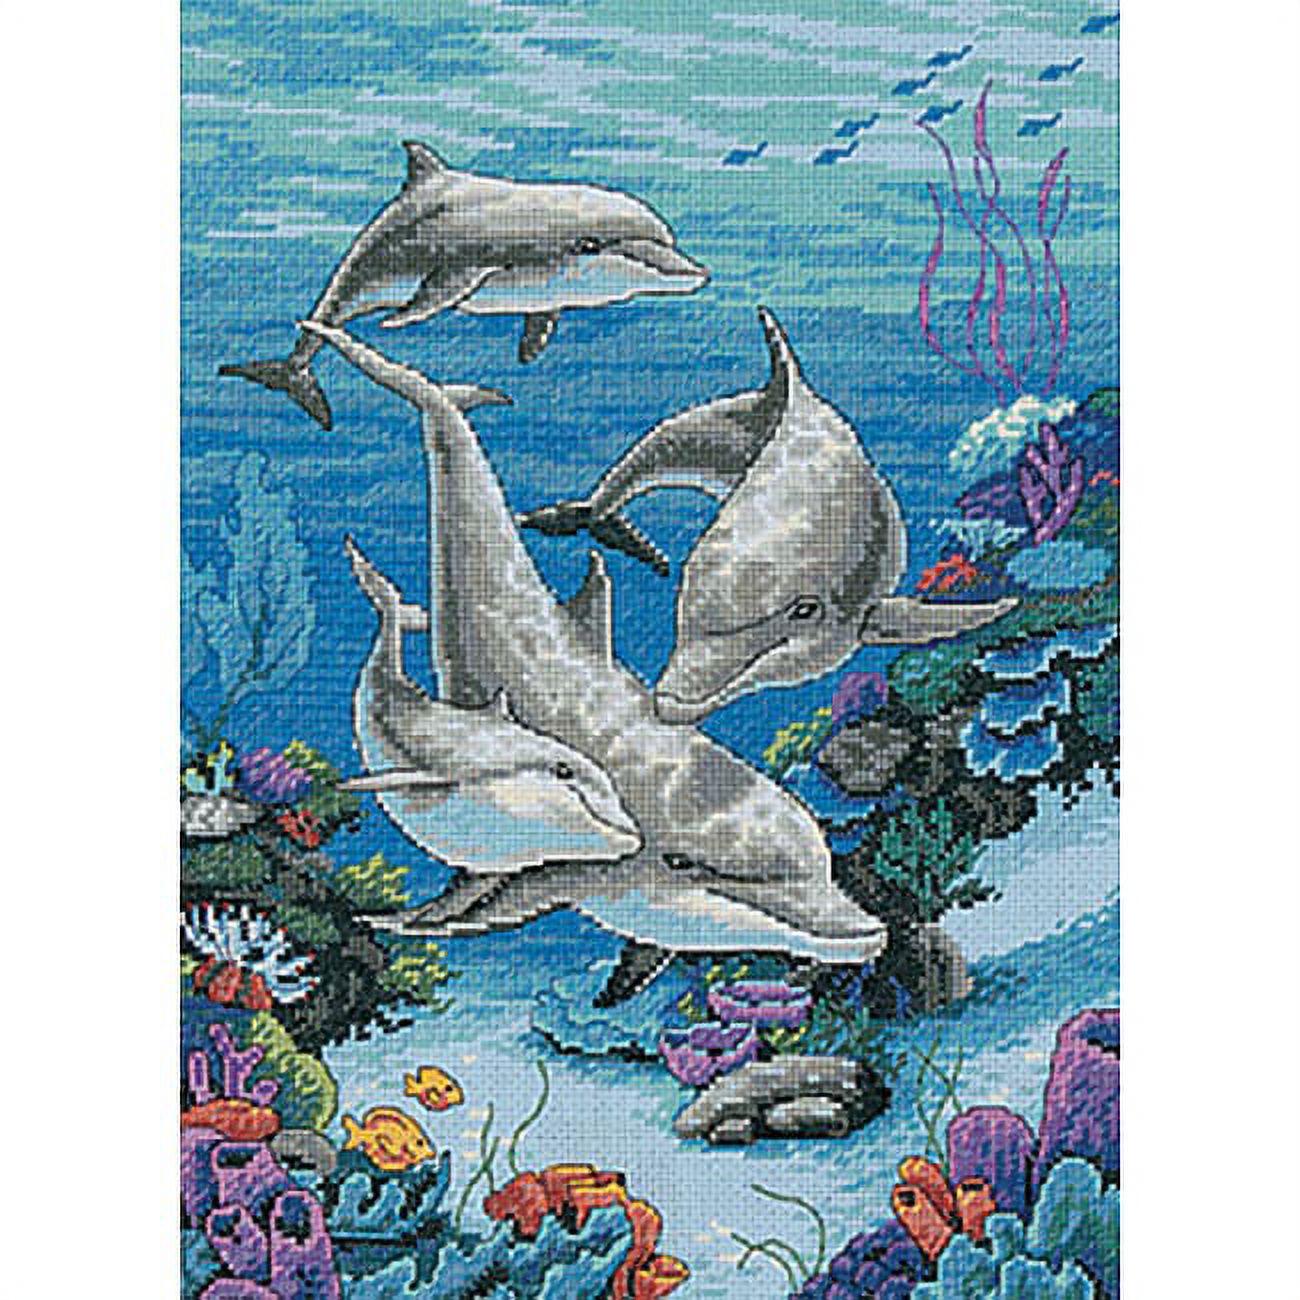 Dimensions Needlecrafts 3830 Dolphins' Domain Counted Cross Stitch Kit - image 2 of 3